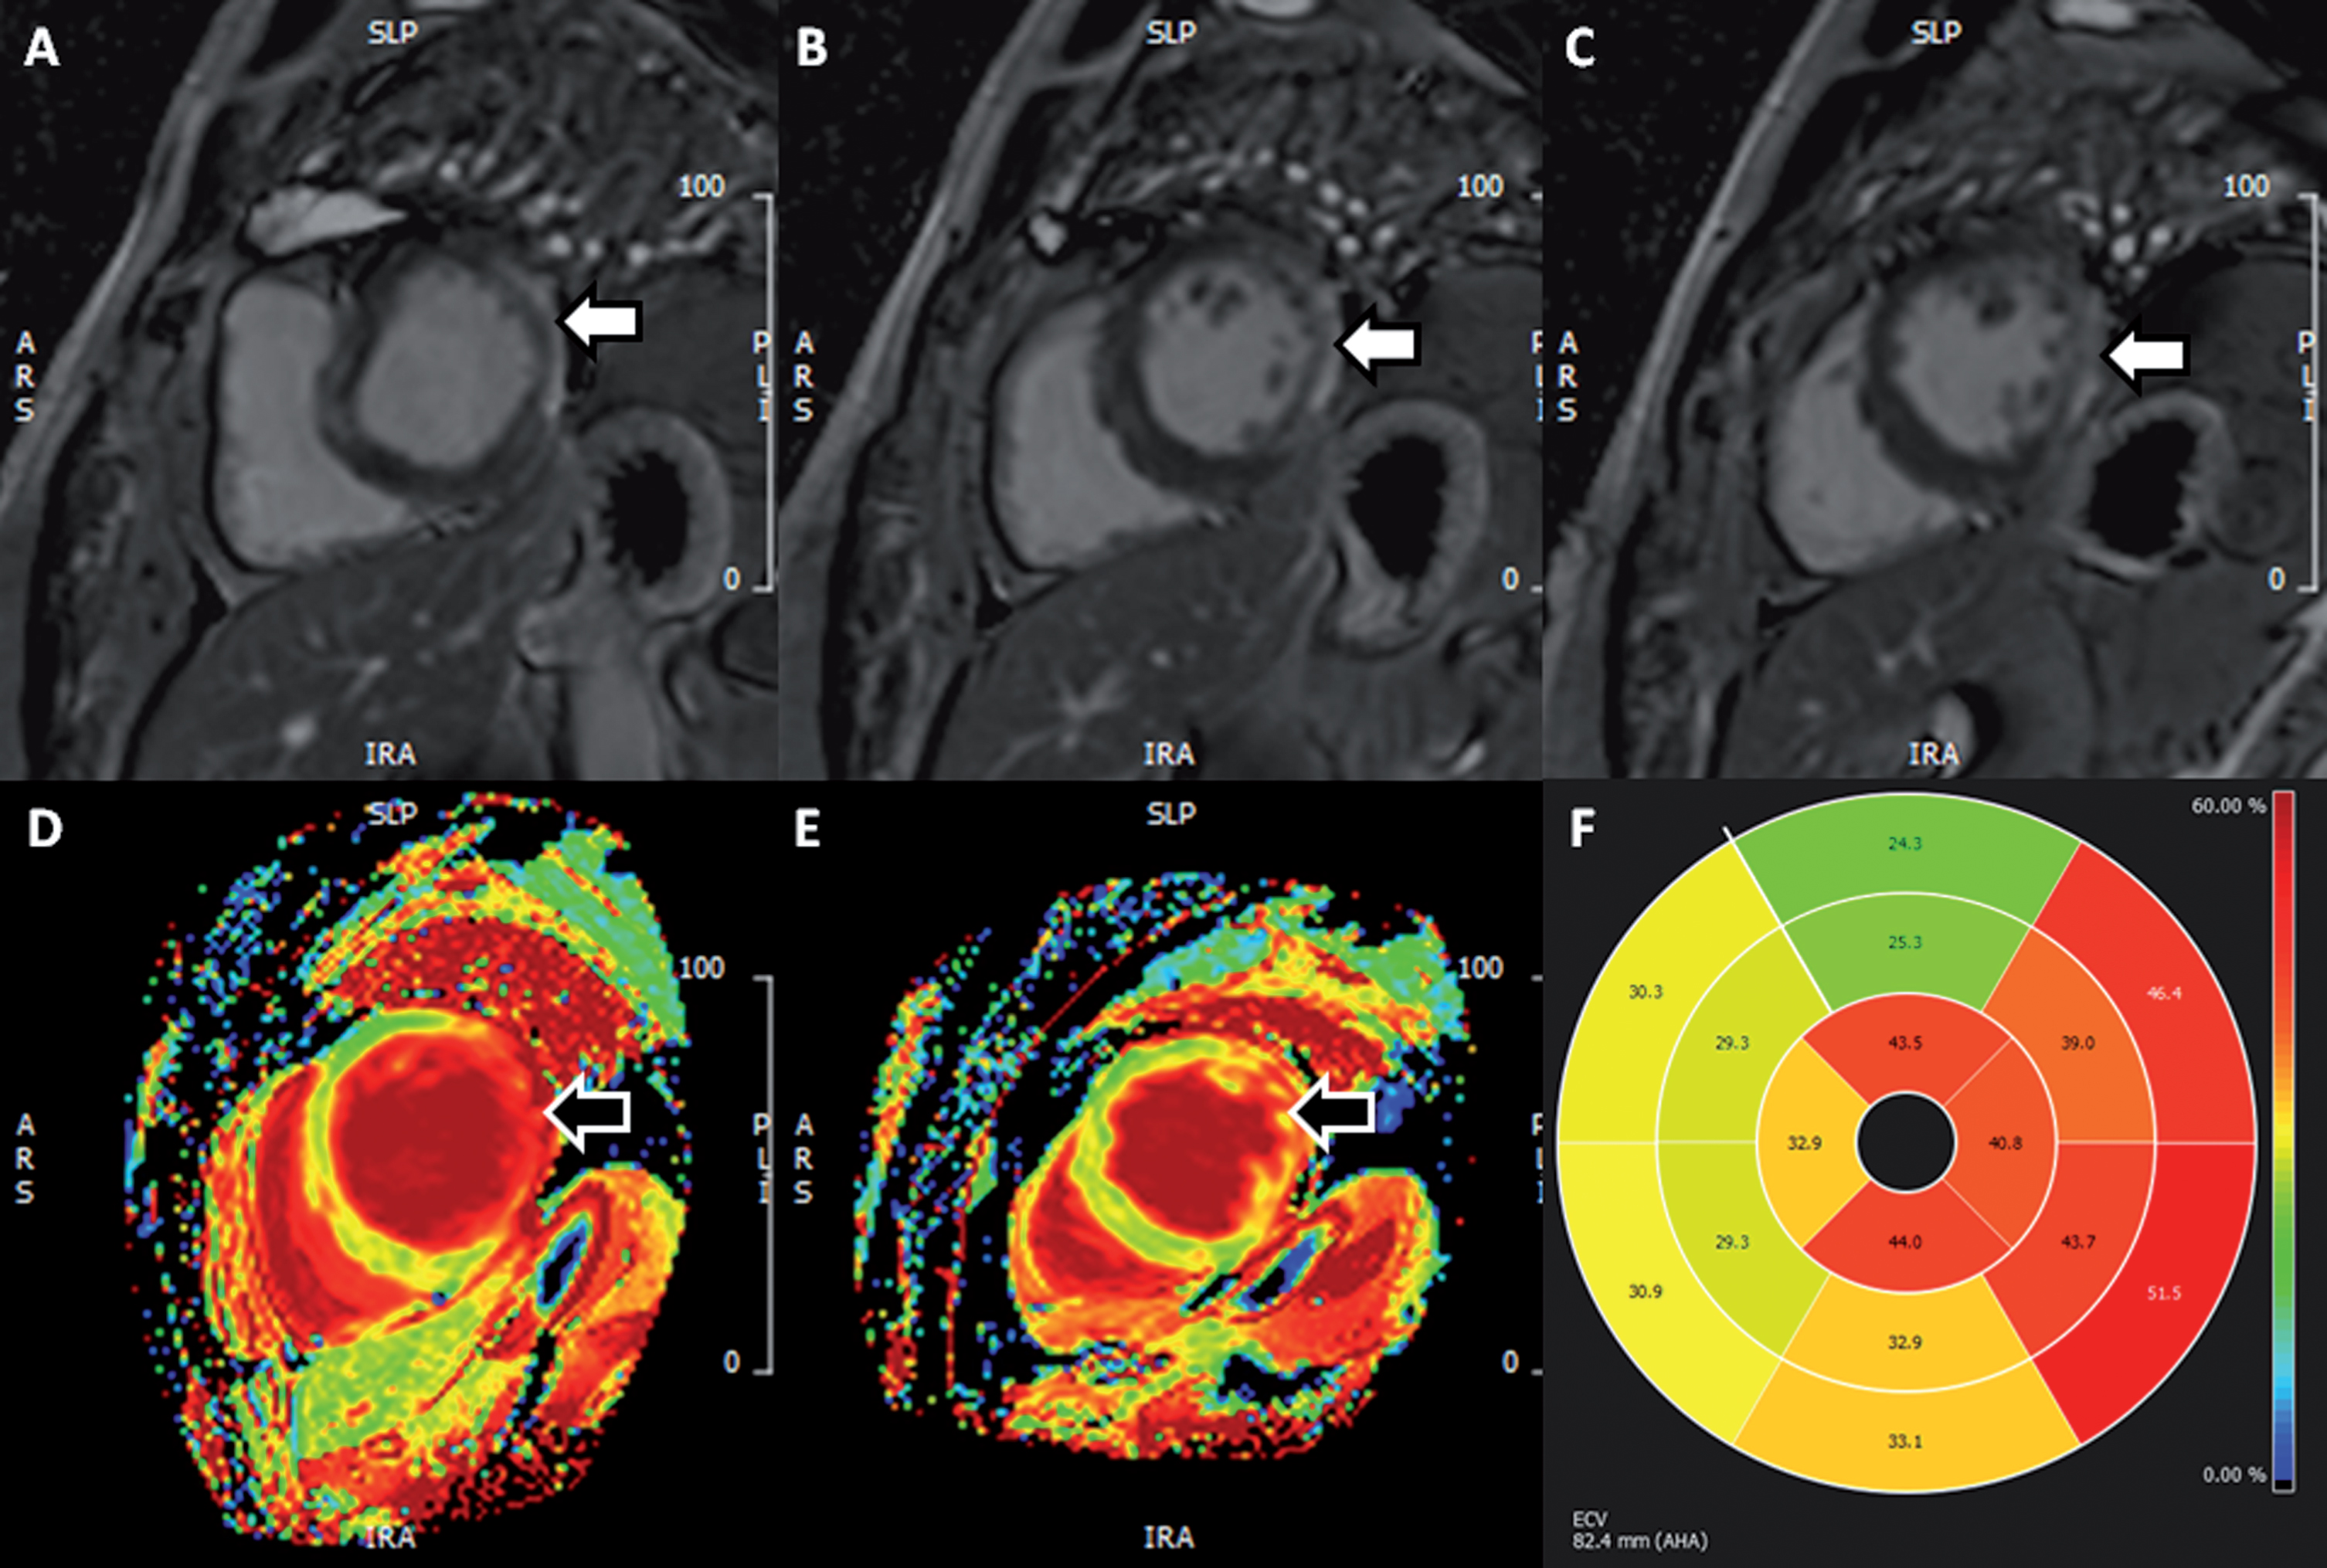 Presence of scar in 53-year old man with myotonic dystrophy type 1. (A-C) Sequential basal and mid-ventricular slices in short-axis from LGE images demonstrating dense subepicardial scar in the left ventricular lateral wall (white arrows). (D-E) Matching basal and mid-ventricular ECV maps providing a qualitative impression of expanded extracellular space in this region (black arrows). (F) Polar plot of segmental ECV values – normal range 20–30%. Here we see significant elevations in ECV, not only in regions of dense scar (lateral wall) but also in the septal and inferior segments, suggesting the presence of diffuse fibrosis in these (LGE-free) segments. (LGE, late gadolinium enhancement; ECV, extracellular volume). Permission for submission granted.